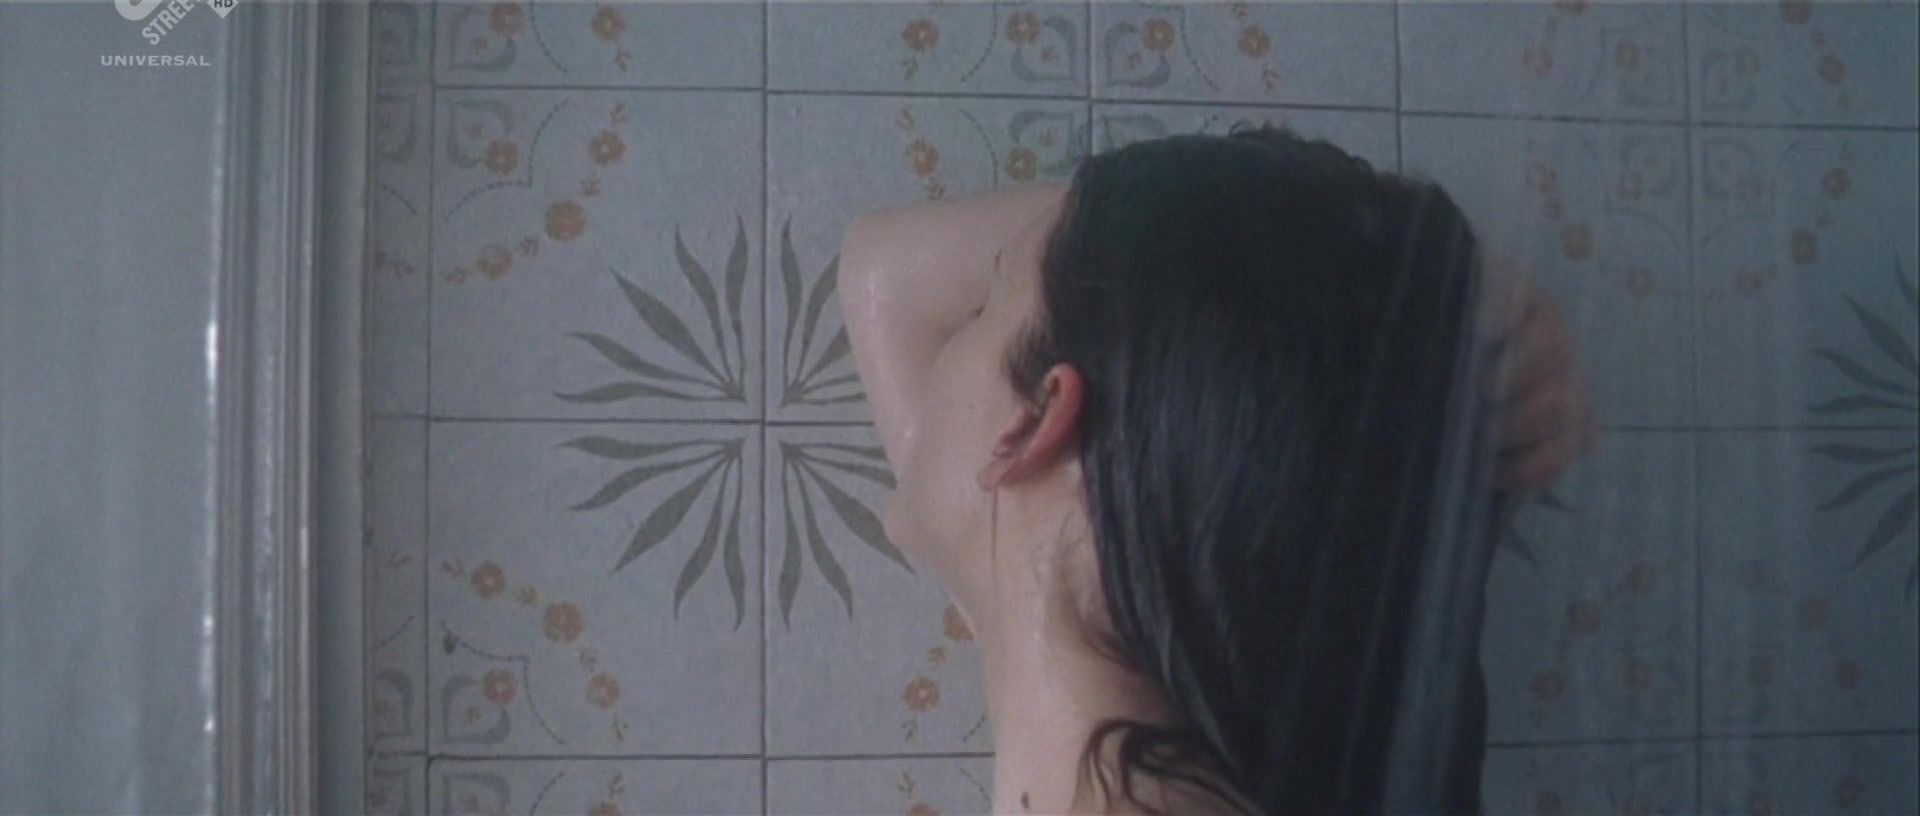 Qwebec Topless Melanie Laurent from Shower Video of the French movie "La chambre des morts" Tattooed